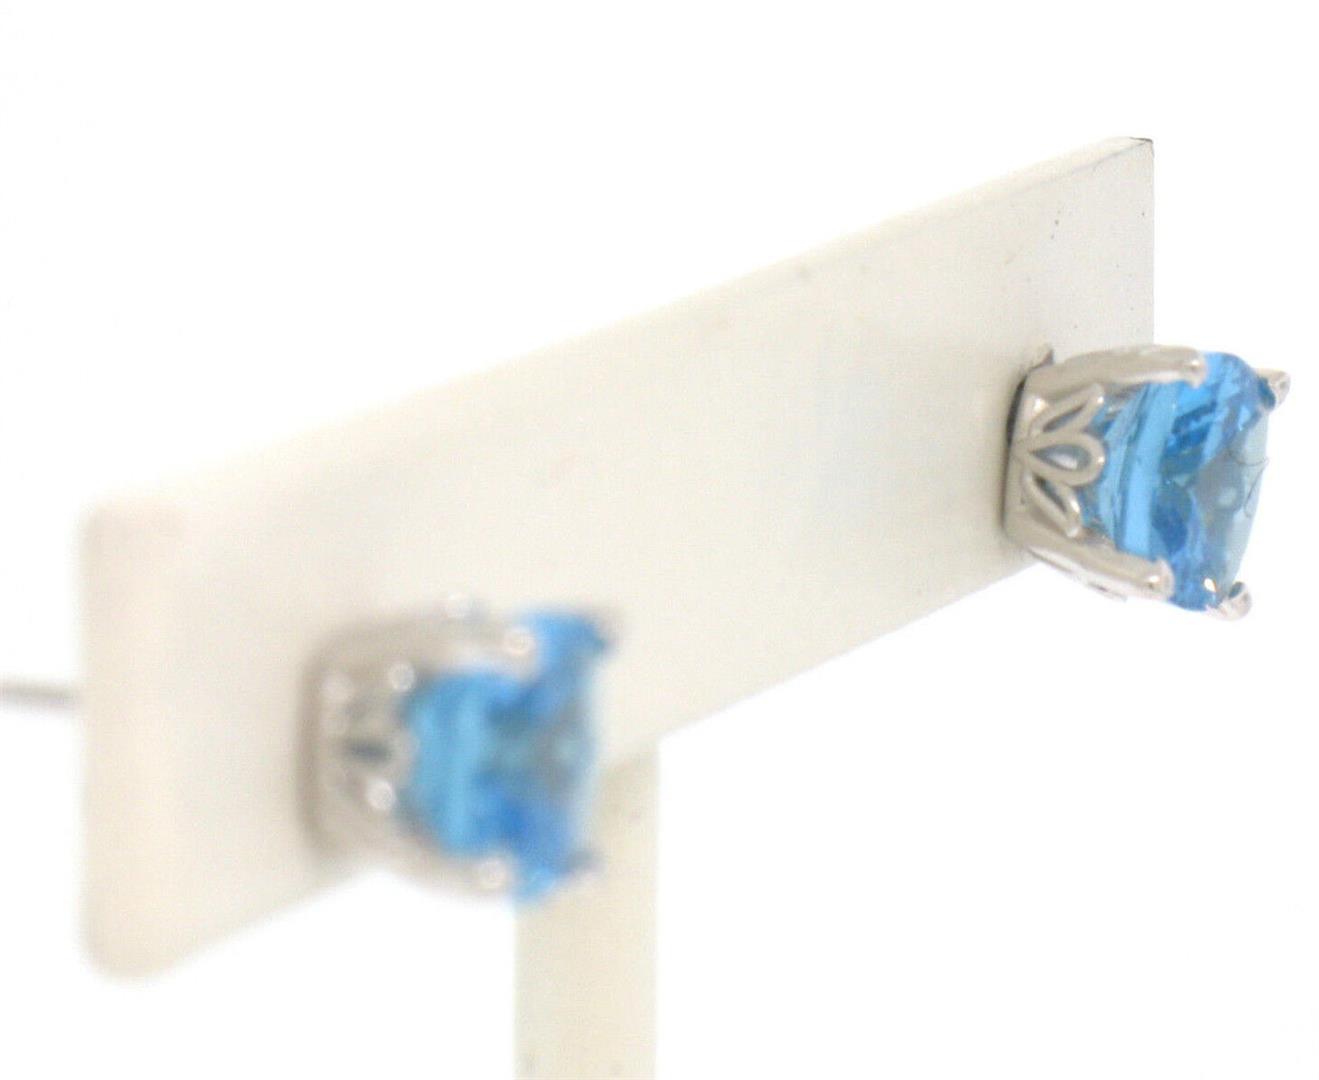 NEW 14k White Gold Cushion Cut Natural Swiss Blue Topaz Solitaire Stud Earrings